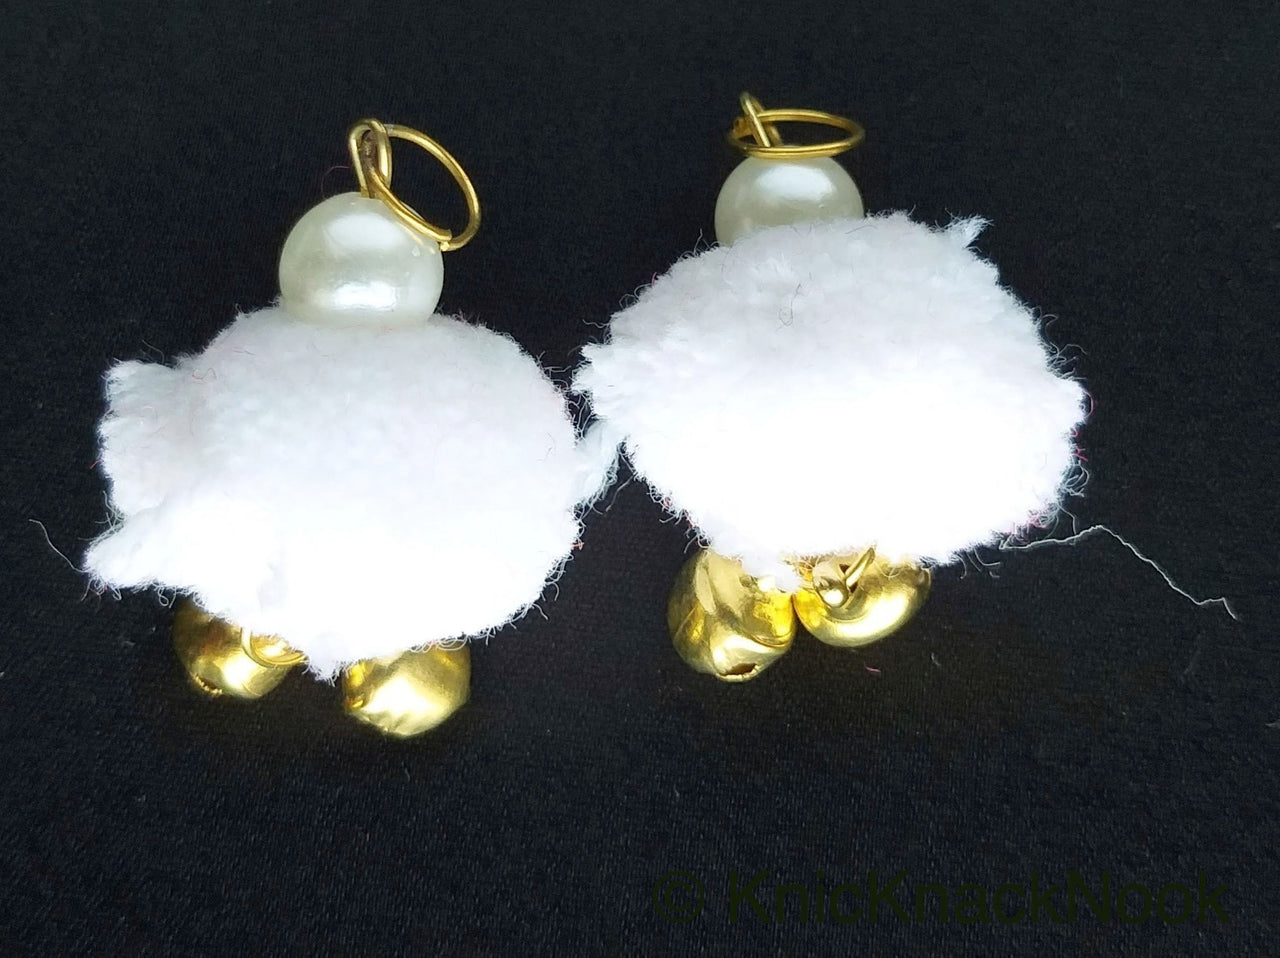 6 x White Pom-Pom Tassel Latkan With Pearl Beads And Jingle Bell Beads, Pompom Decorations, Approx. 30mm - 210119L210